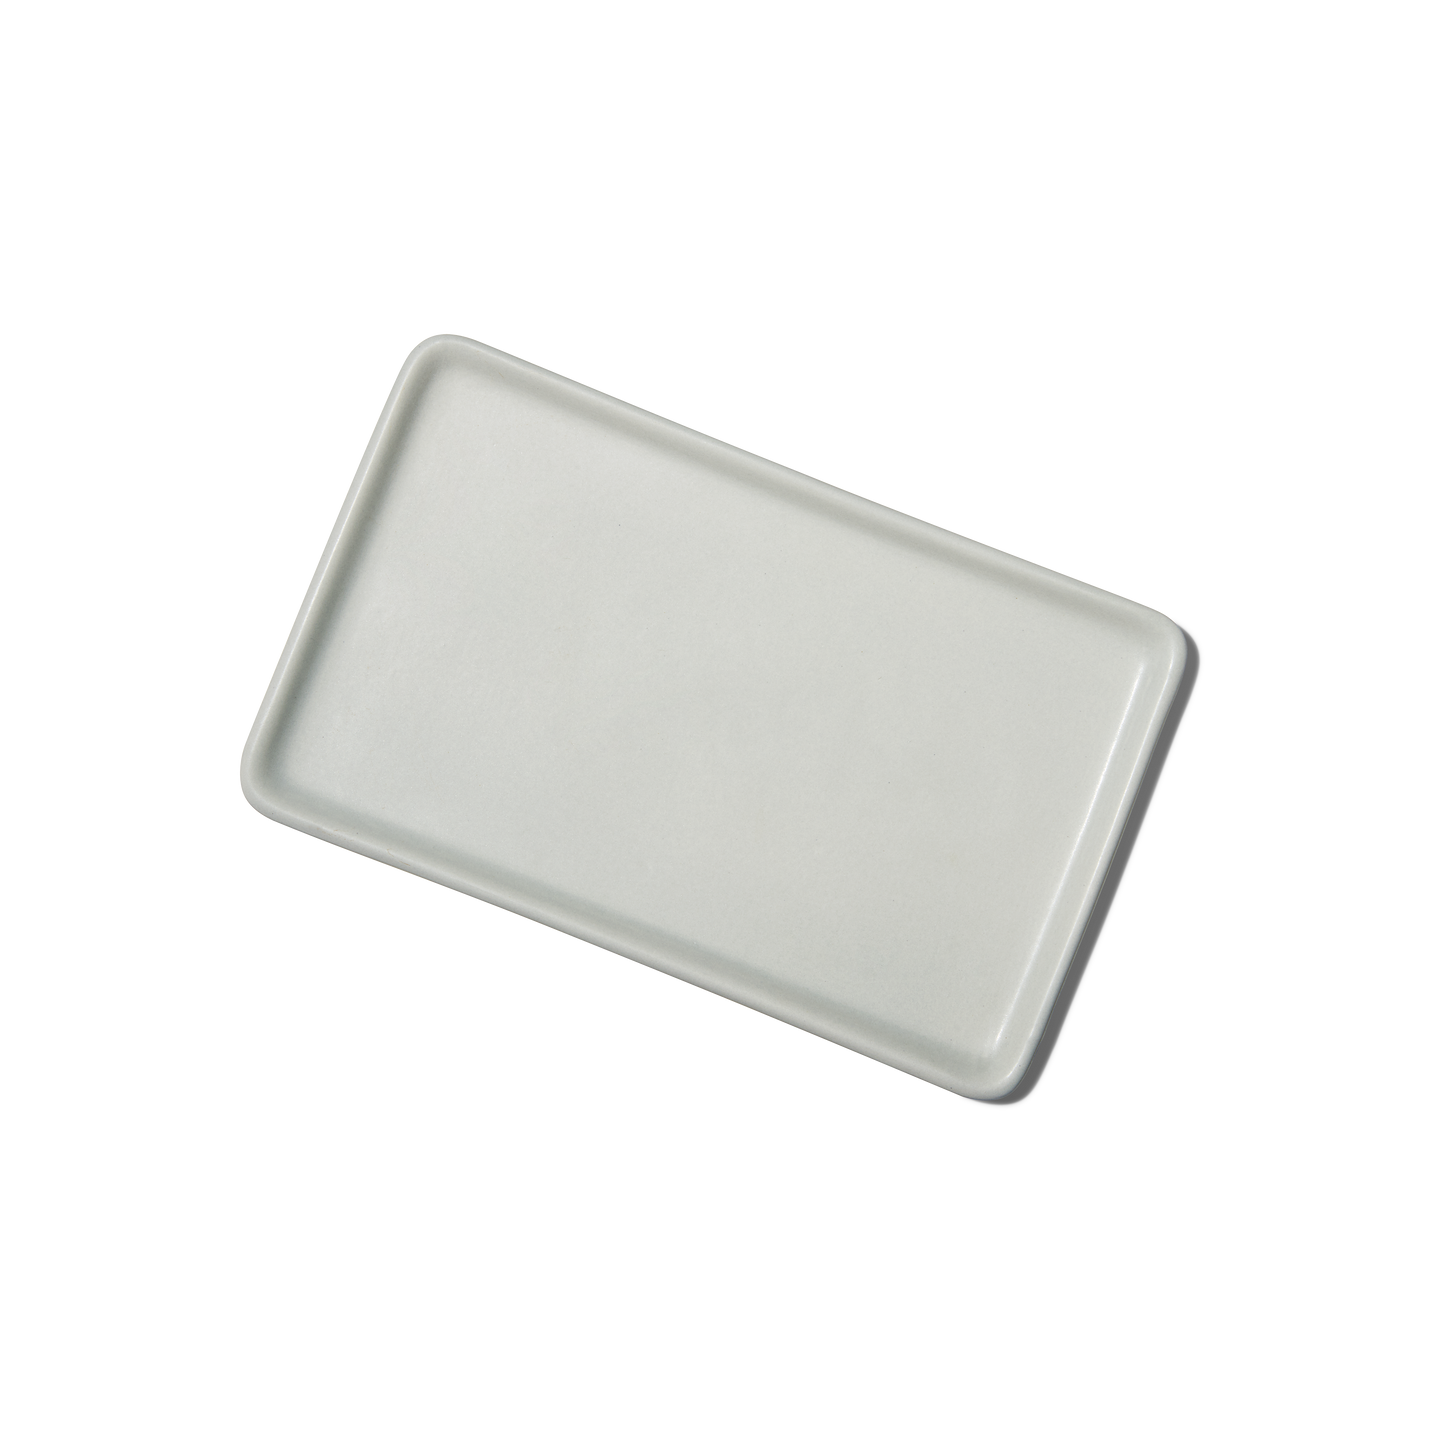 Serving Tray in Pigeon